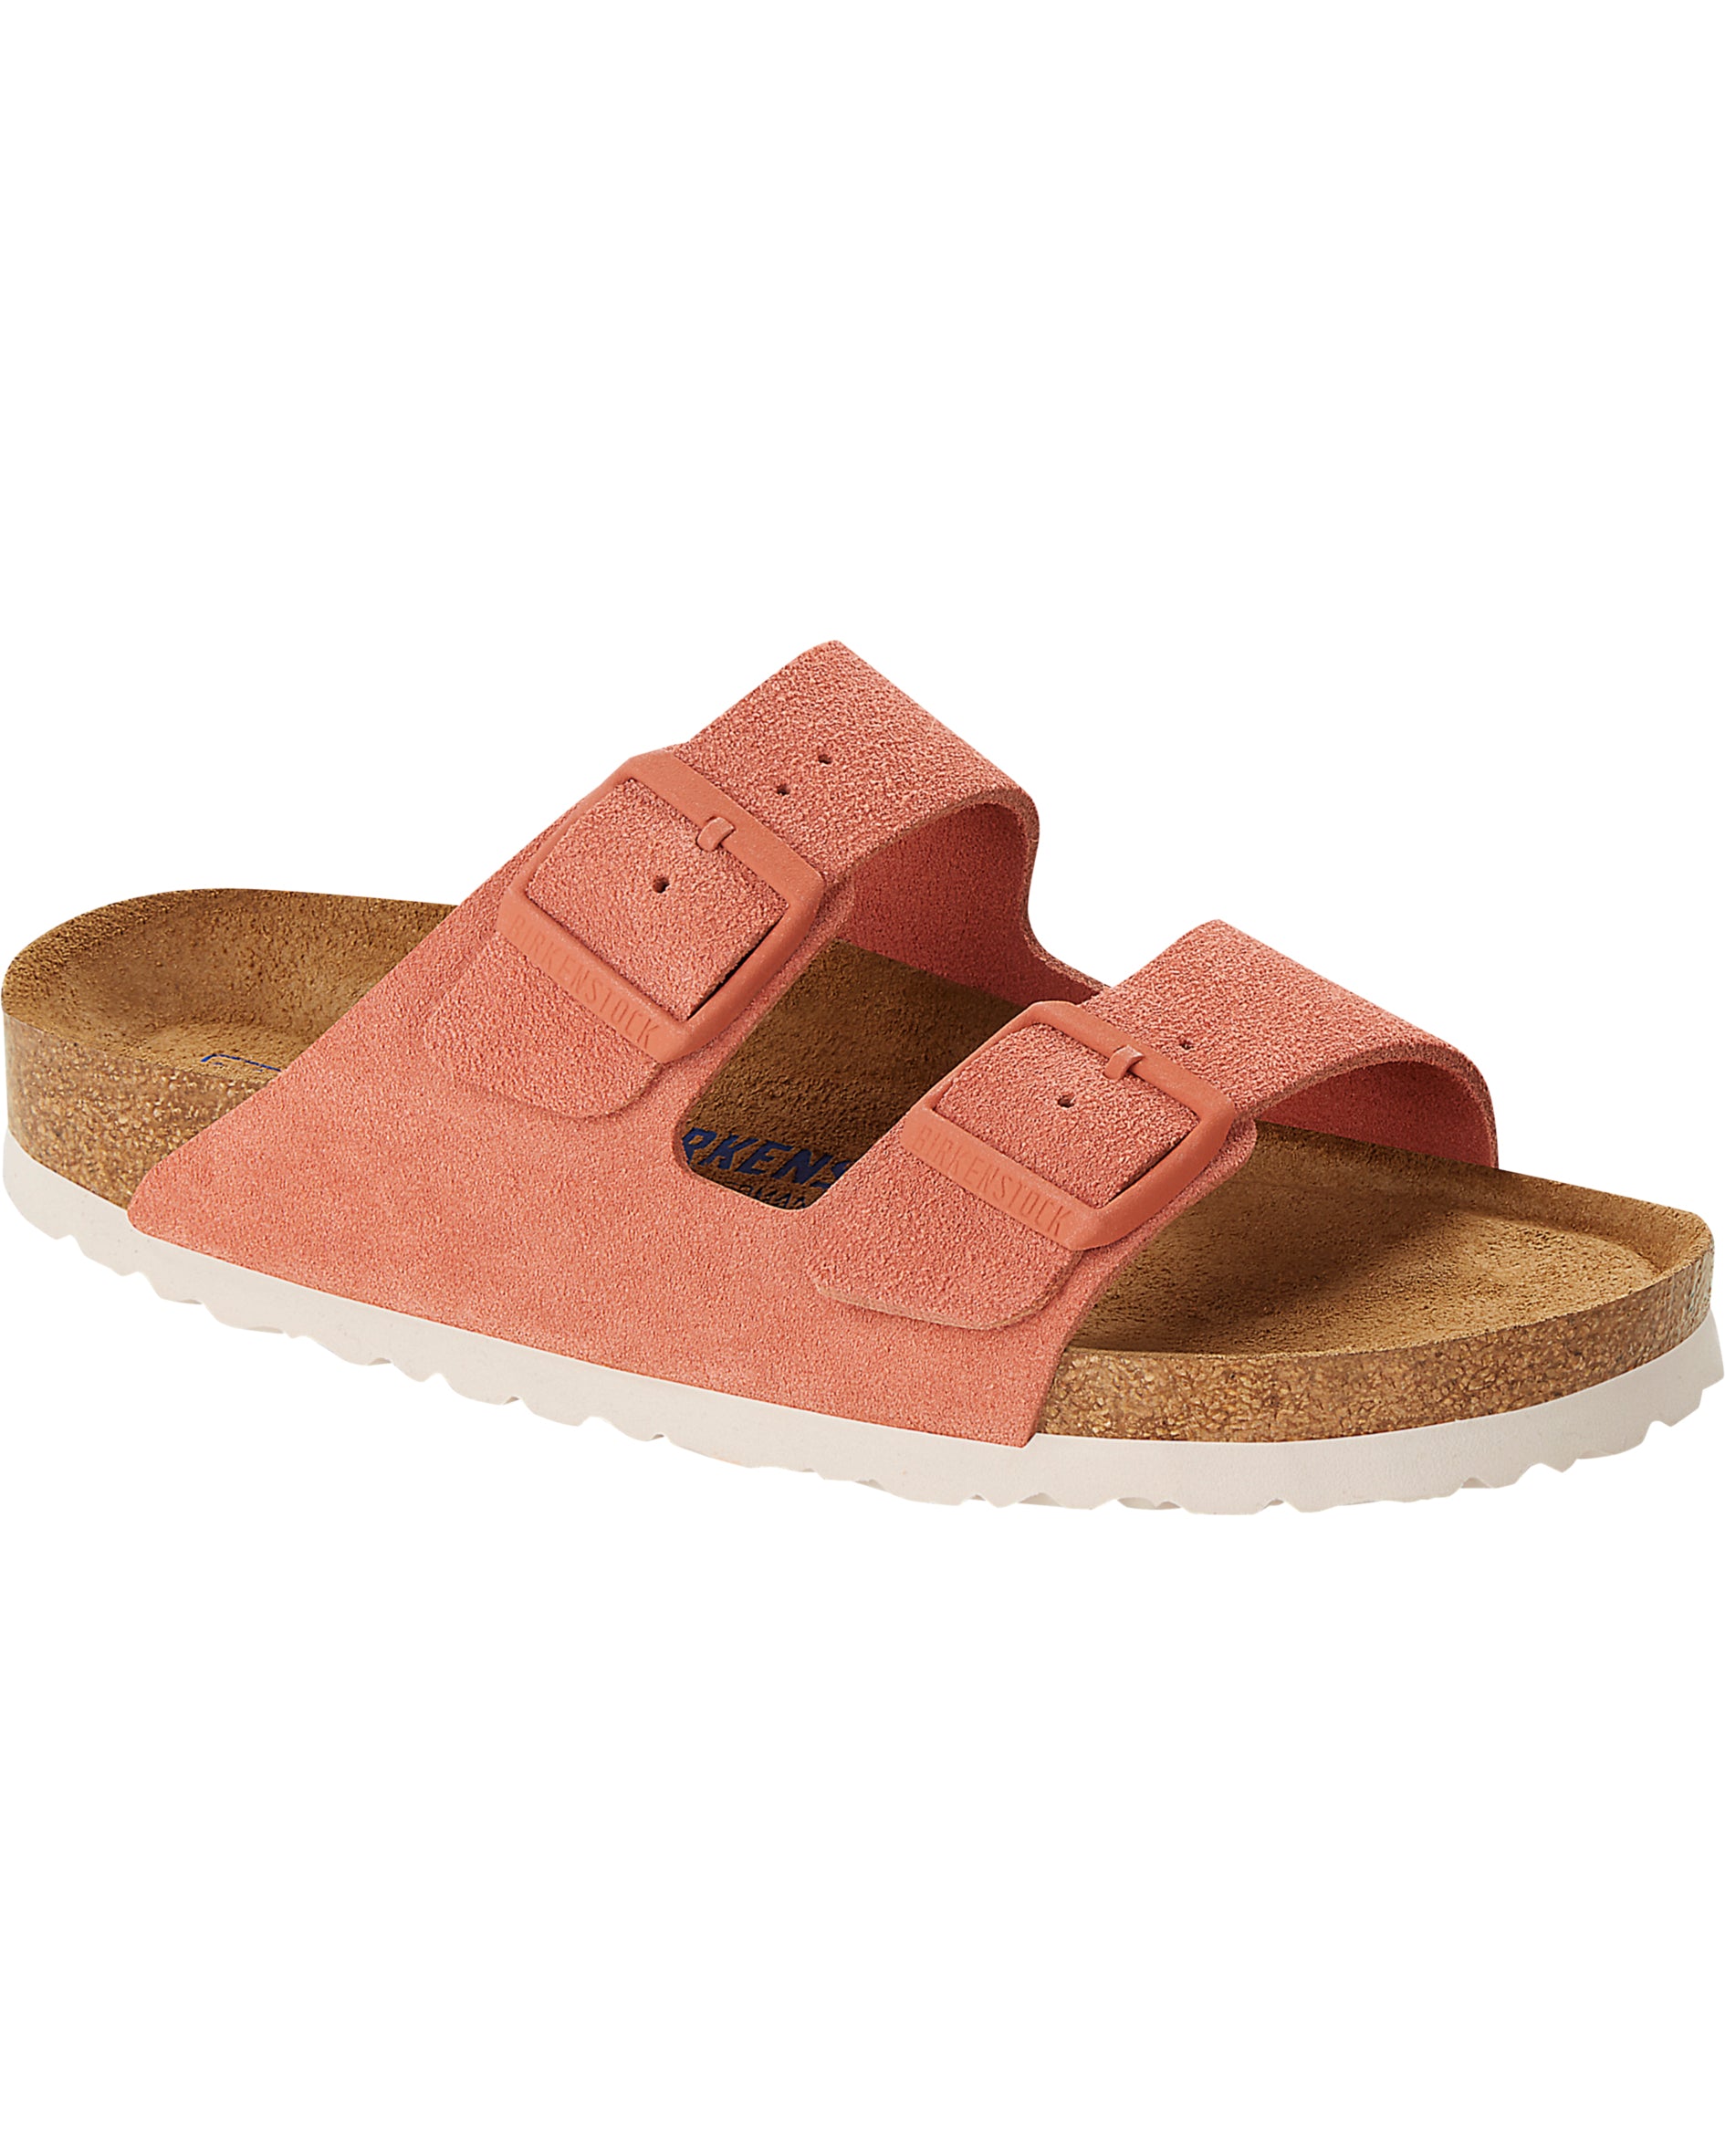 Birkenstock Arizona Soft Footbed Leather Sandal | Urban Outfitters Mexico -  Clothing, Music, Home & Accessories